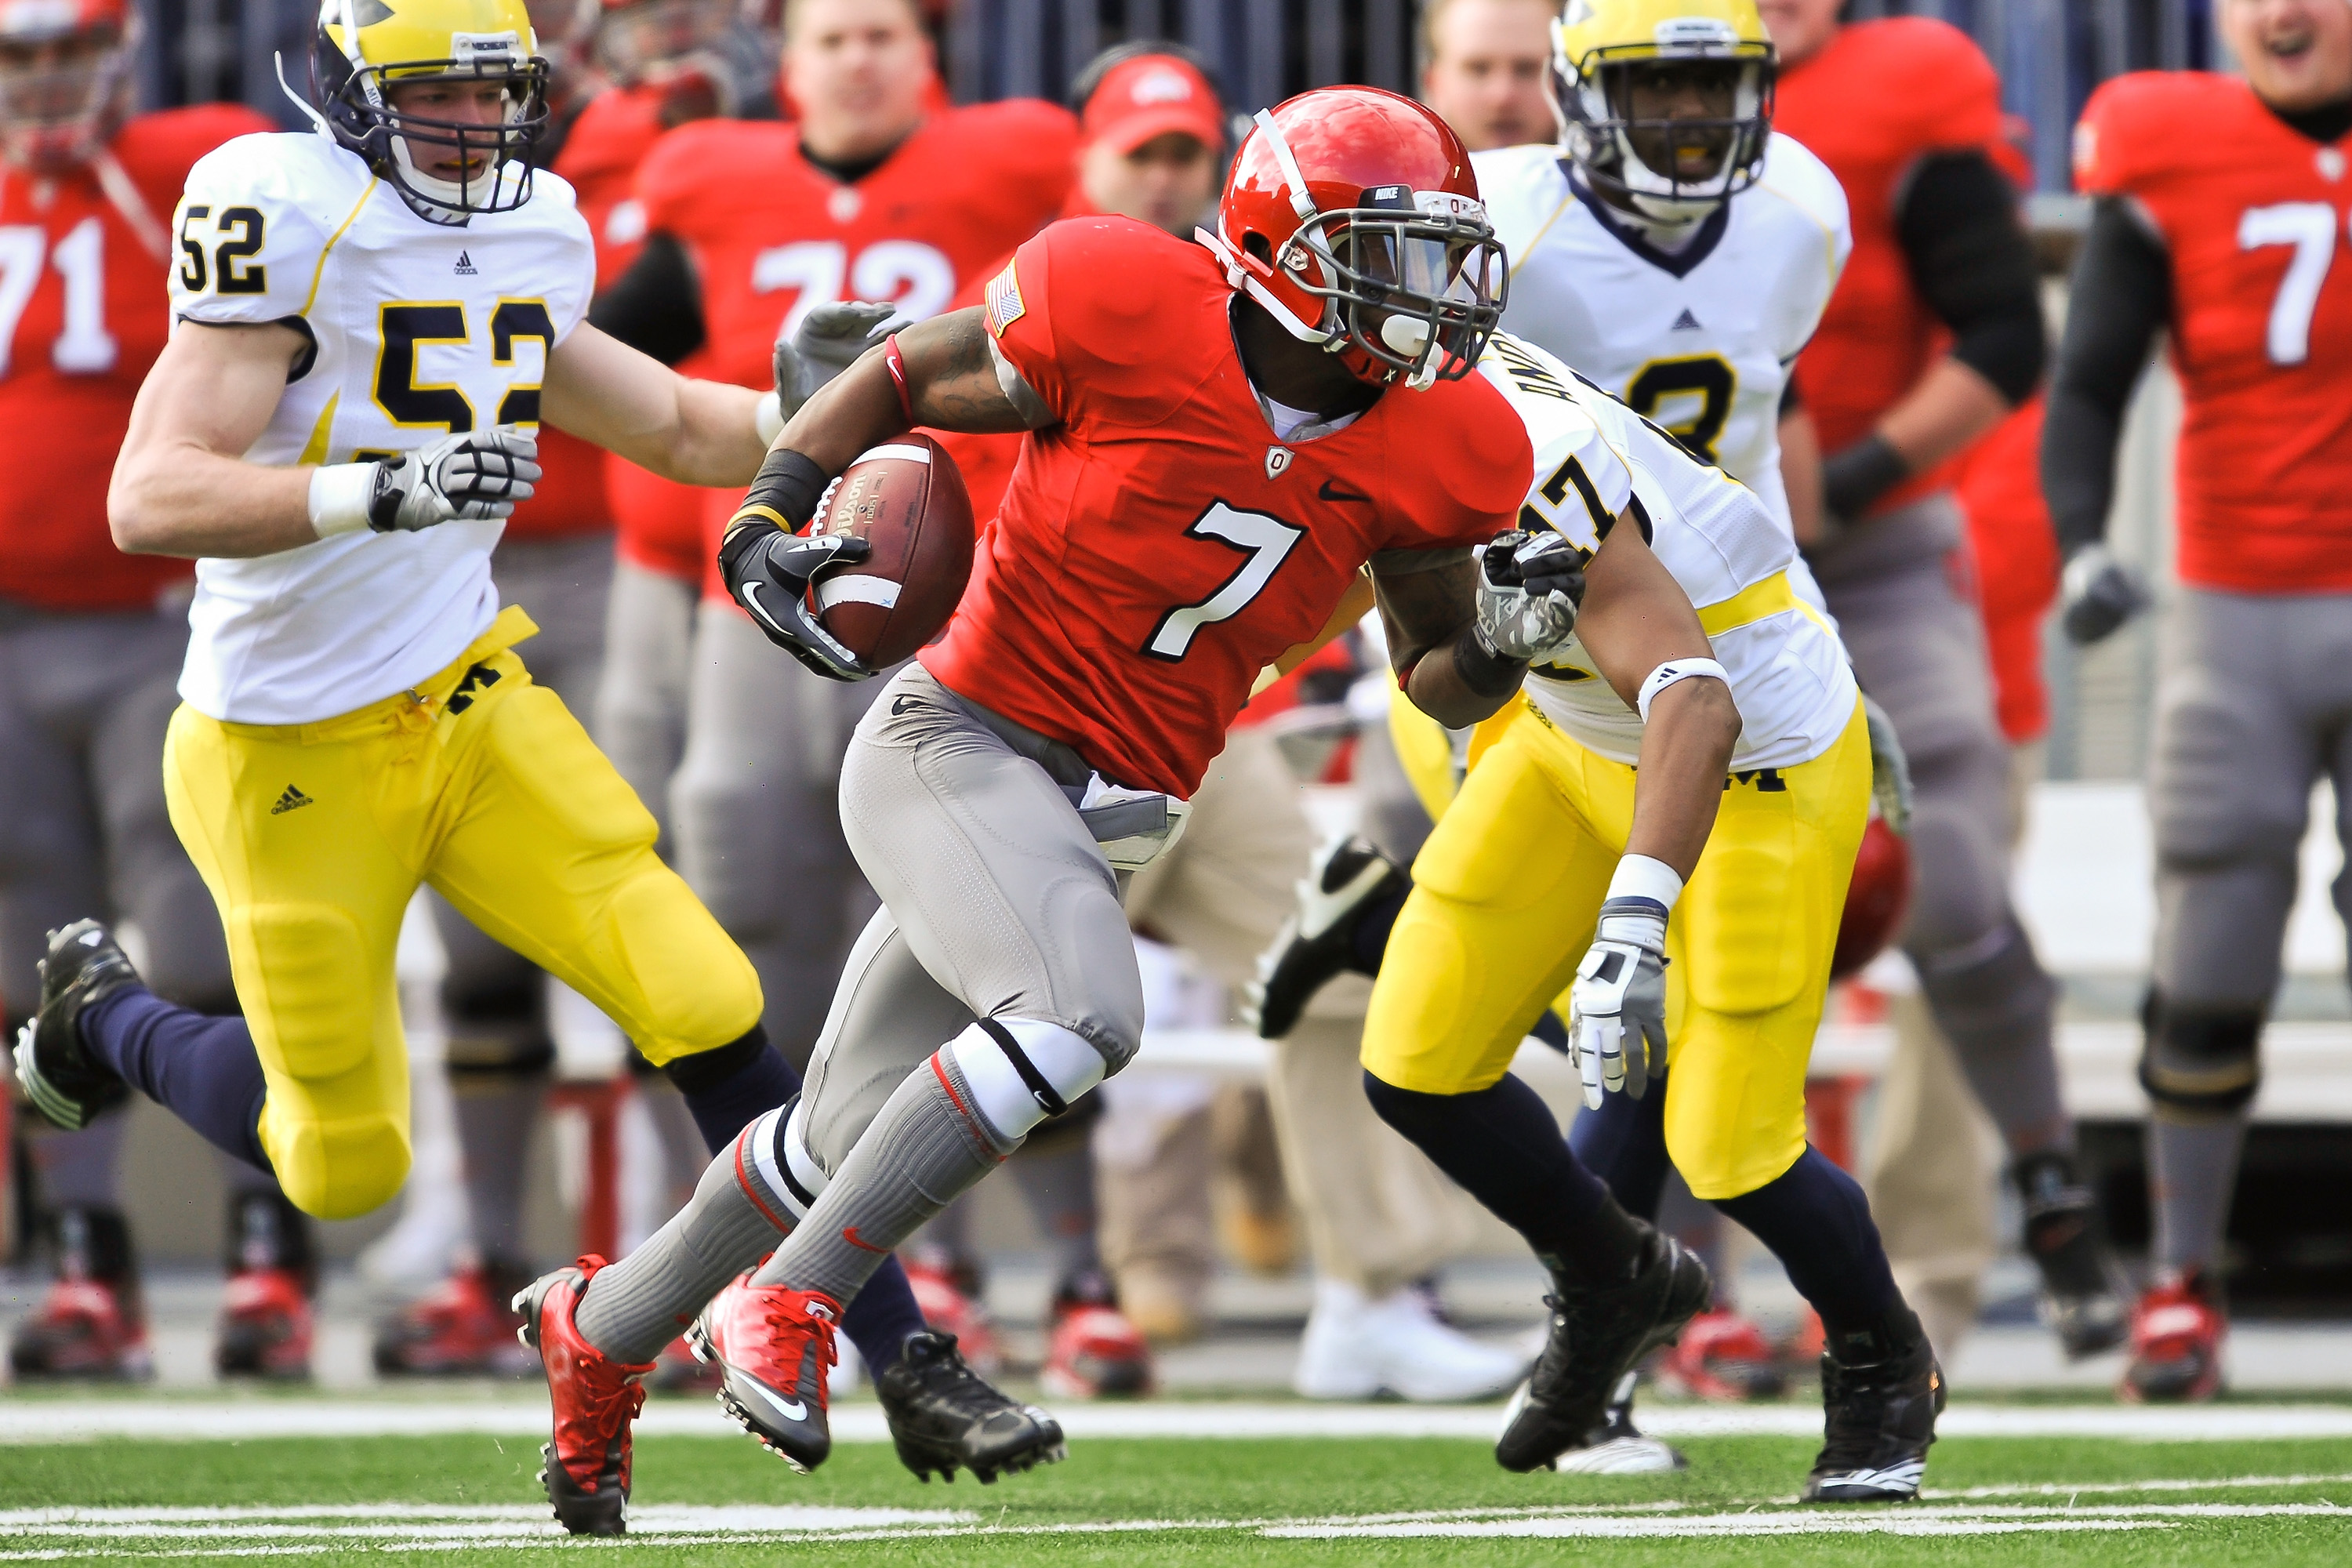 COLUMBUS, OH - NOVEMBER 27:  Jordan Hall #7 of the Ohio State Buckeyes returns a kickoff against the Michigan Wolverines at Ohio Stadium on November 27, 2010 in Columbus, Ohio.  (Photo by Jamie Sabau/Getty Images)